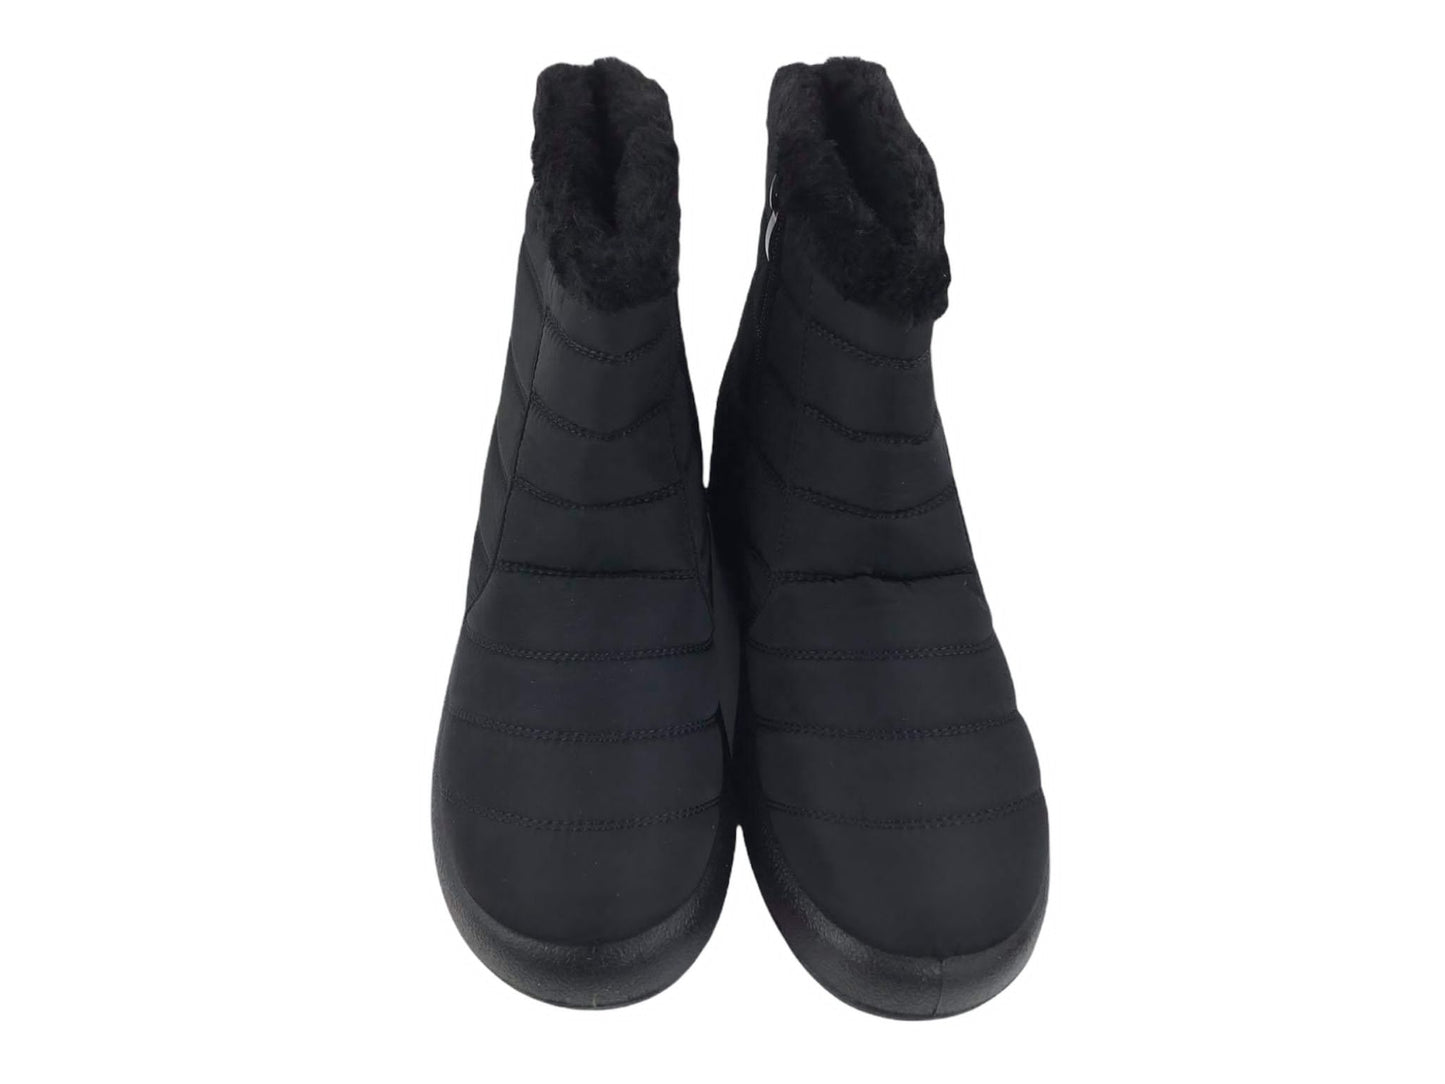 Ecolight | Women's black ankle boots with side zipper super light and Tex Filomena